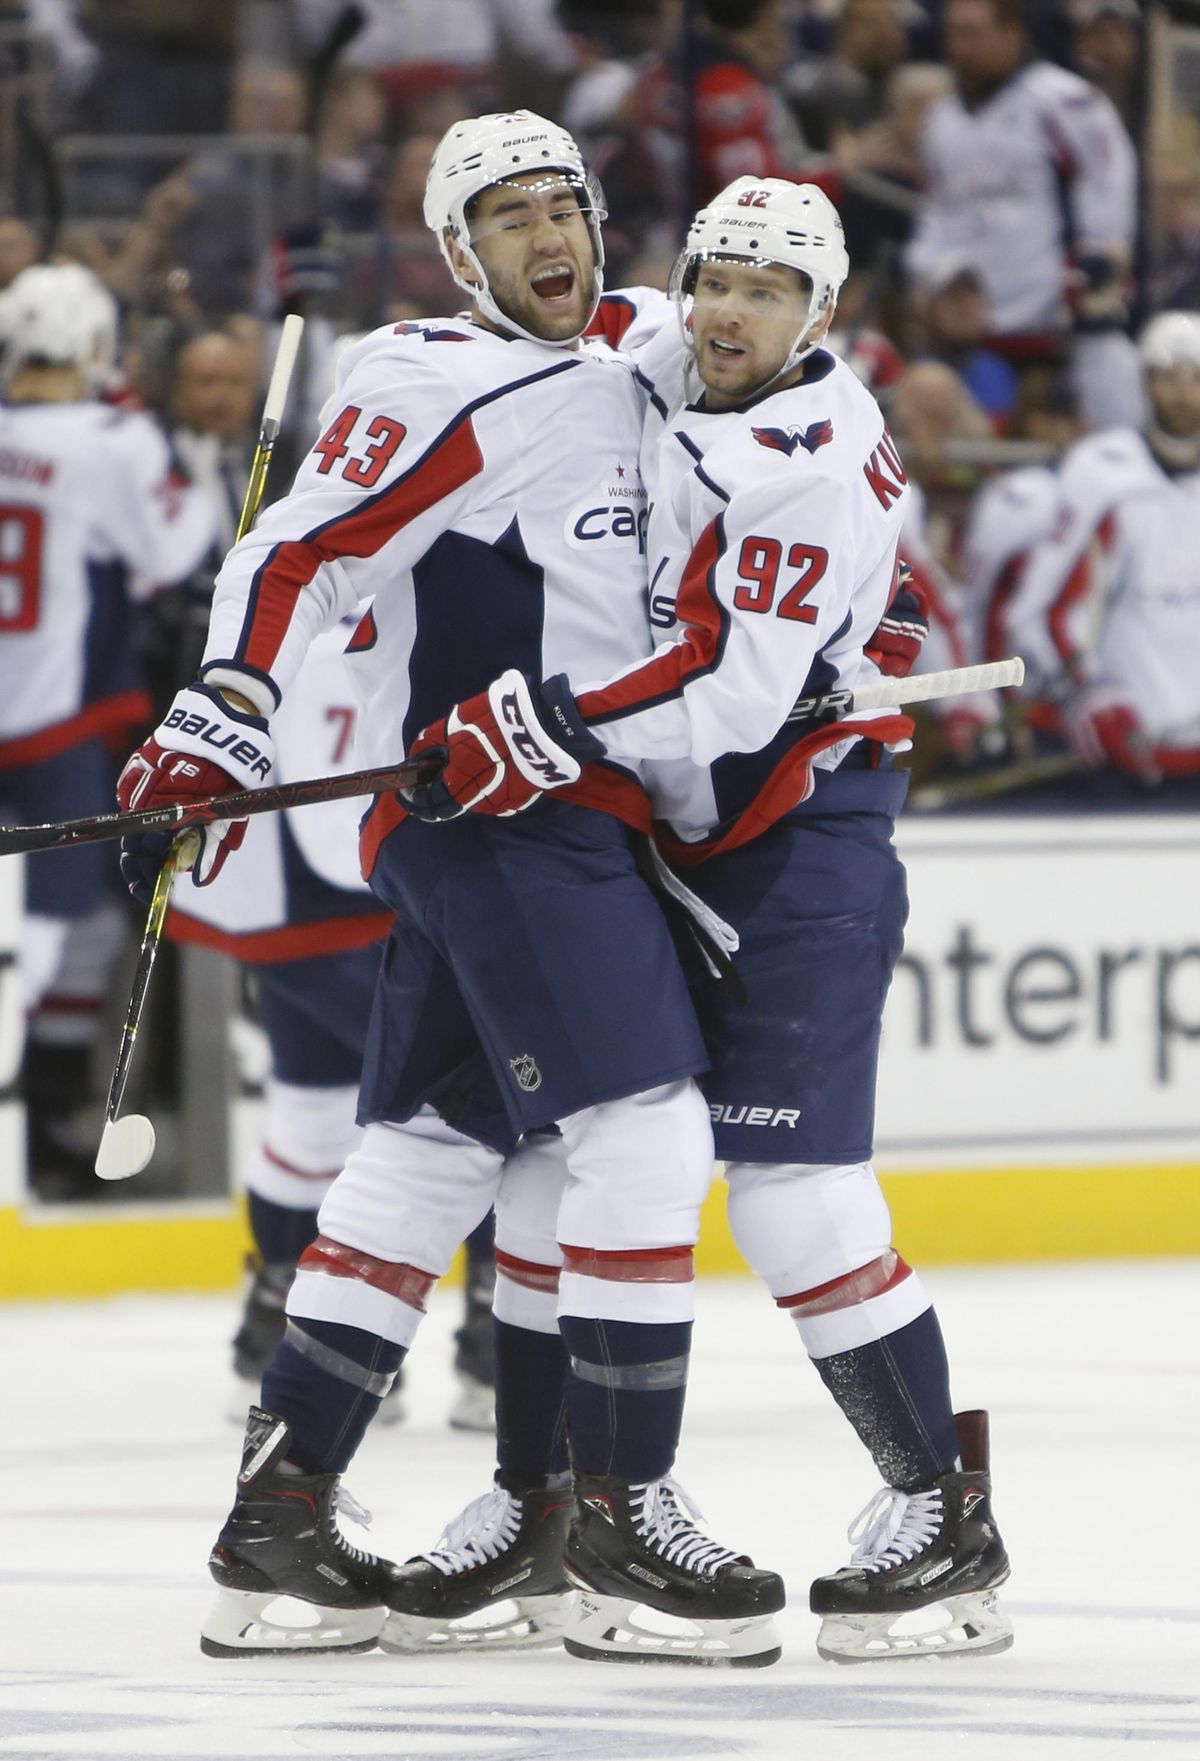 Washington Capitals’ Tom Wilson, left, celebrates his goal against the Columbus Blue Jackets with teammate Evgeny Kuznetsov, of Russia, during Game 4 of an NHL first-round hockey playoff series Thursday, April 19, 2018, in Columbus, Ohio. (Jay LaPrete / Associated Press)